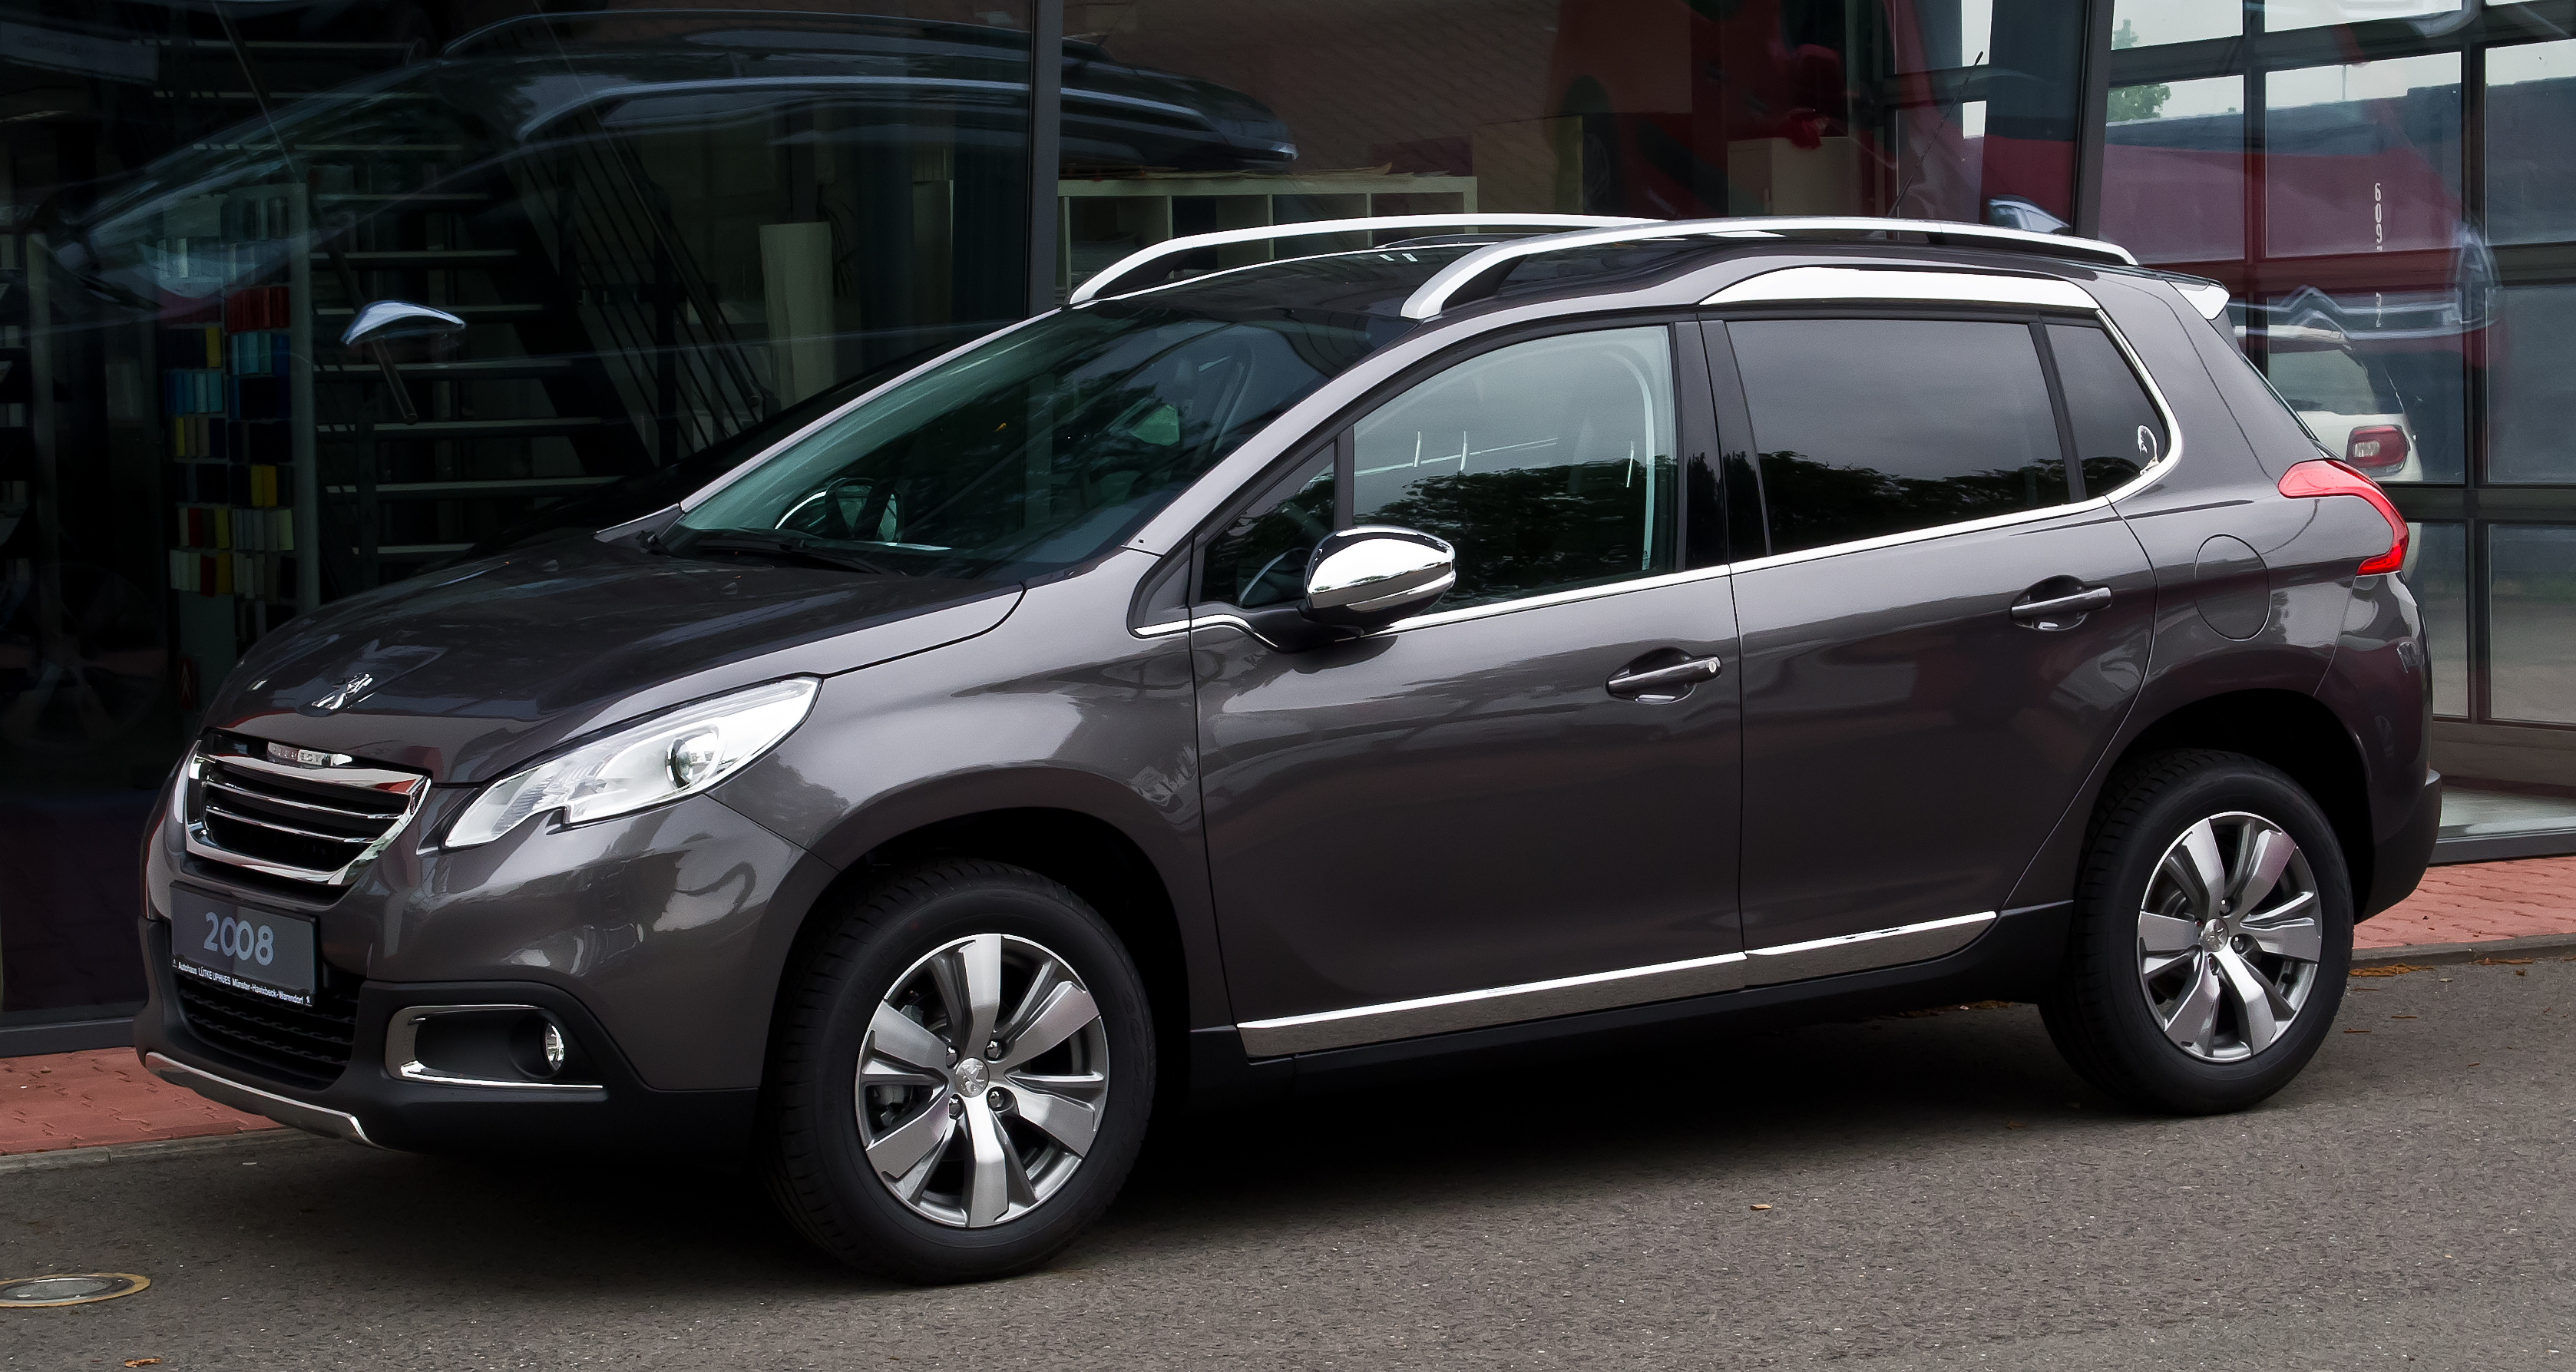 Peugeot 2008 photos - PhotoGallery with 179 pics| CarsBase.com